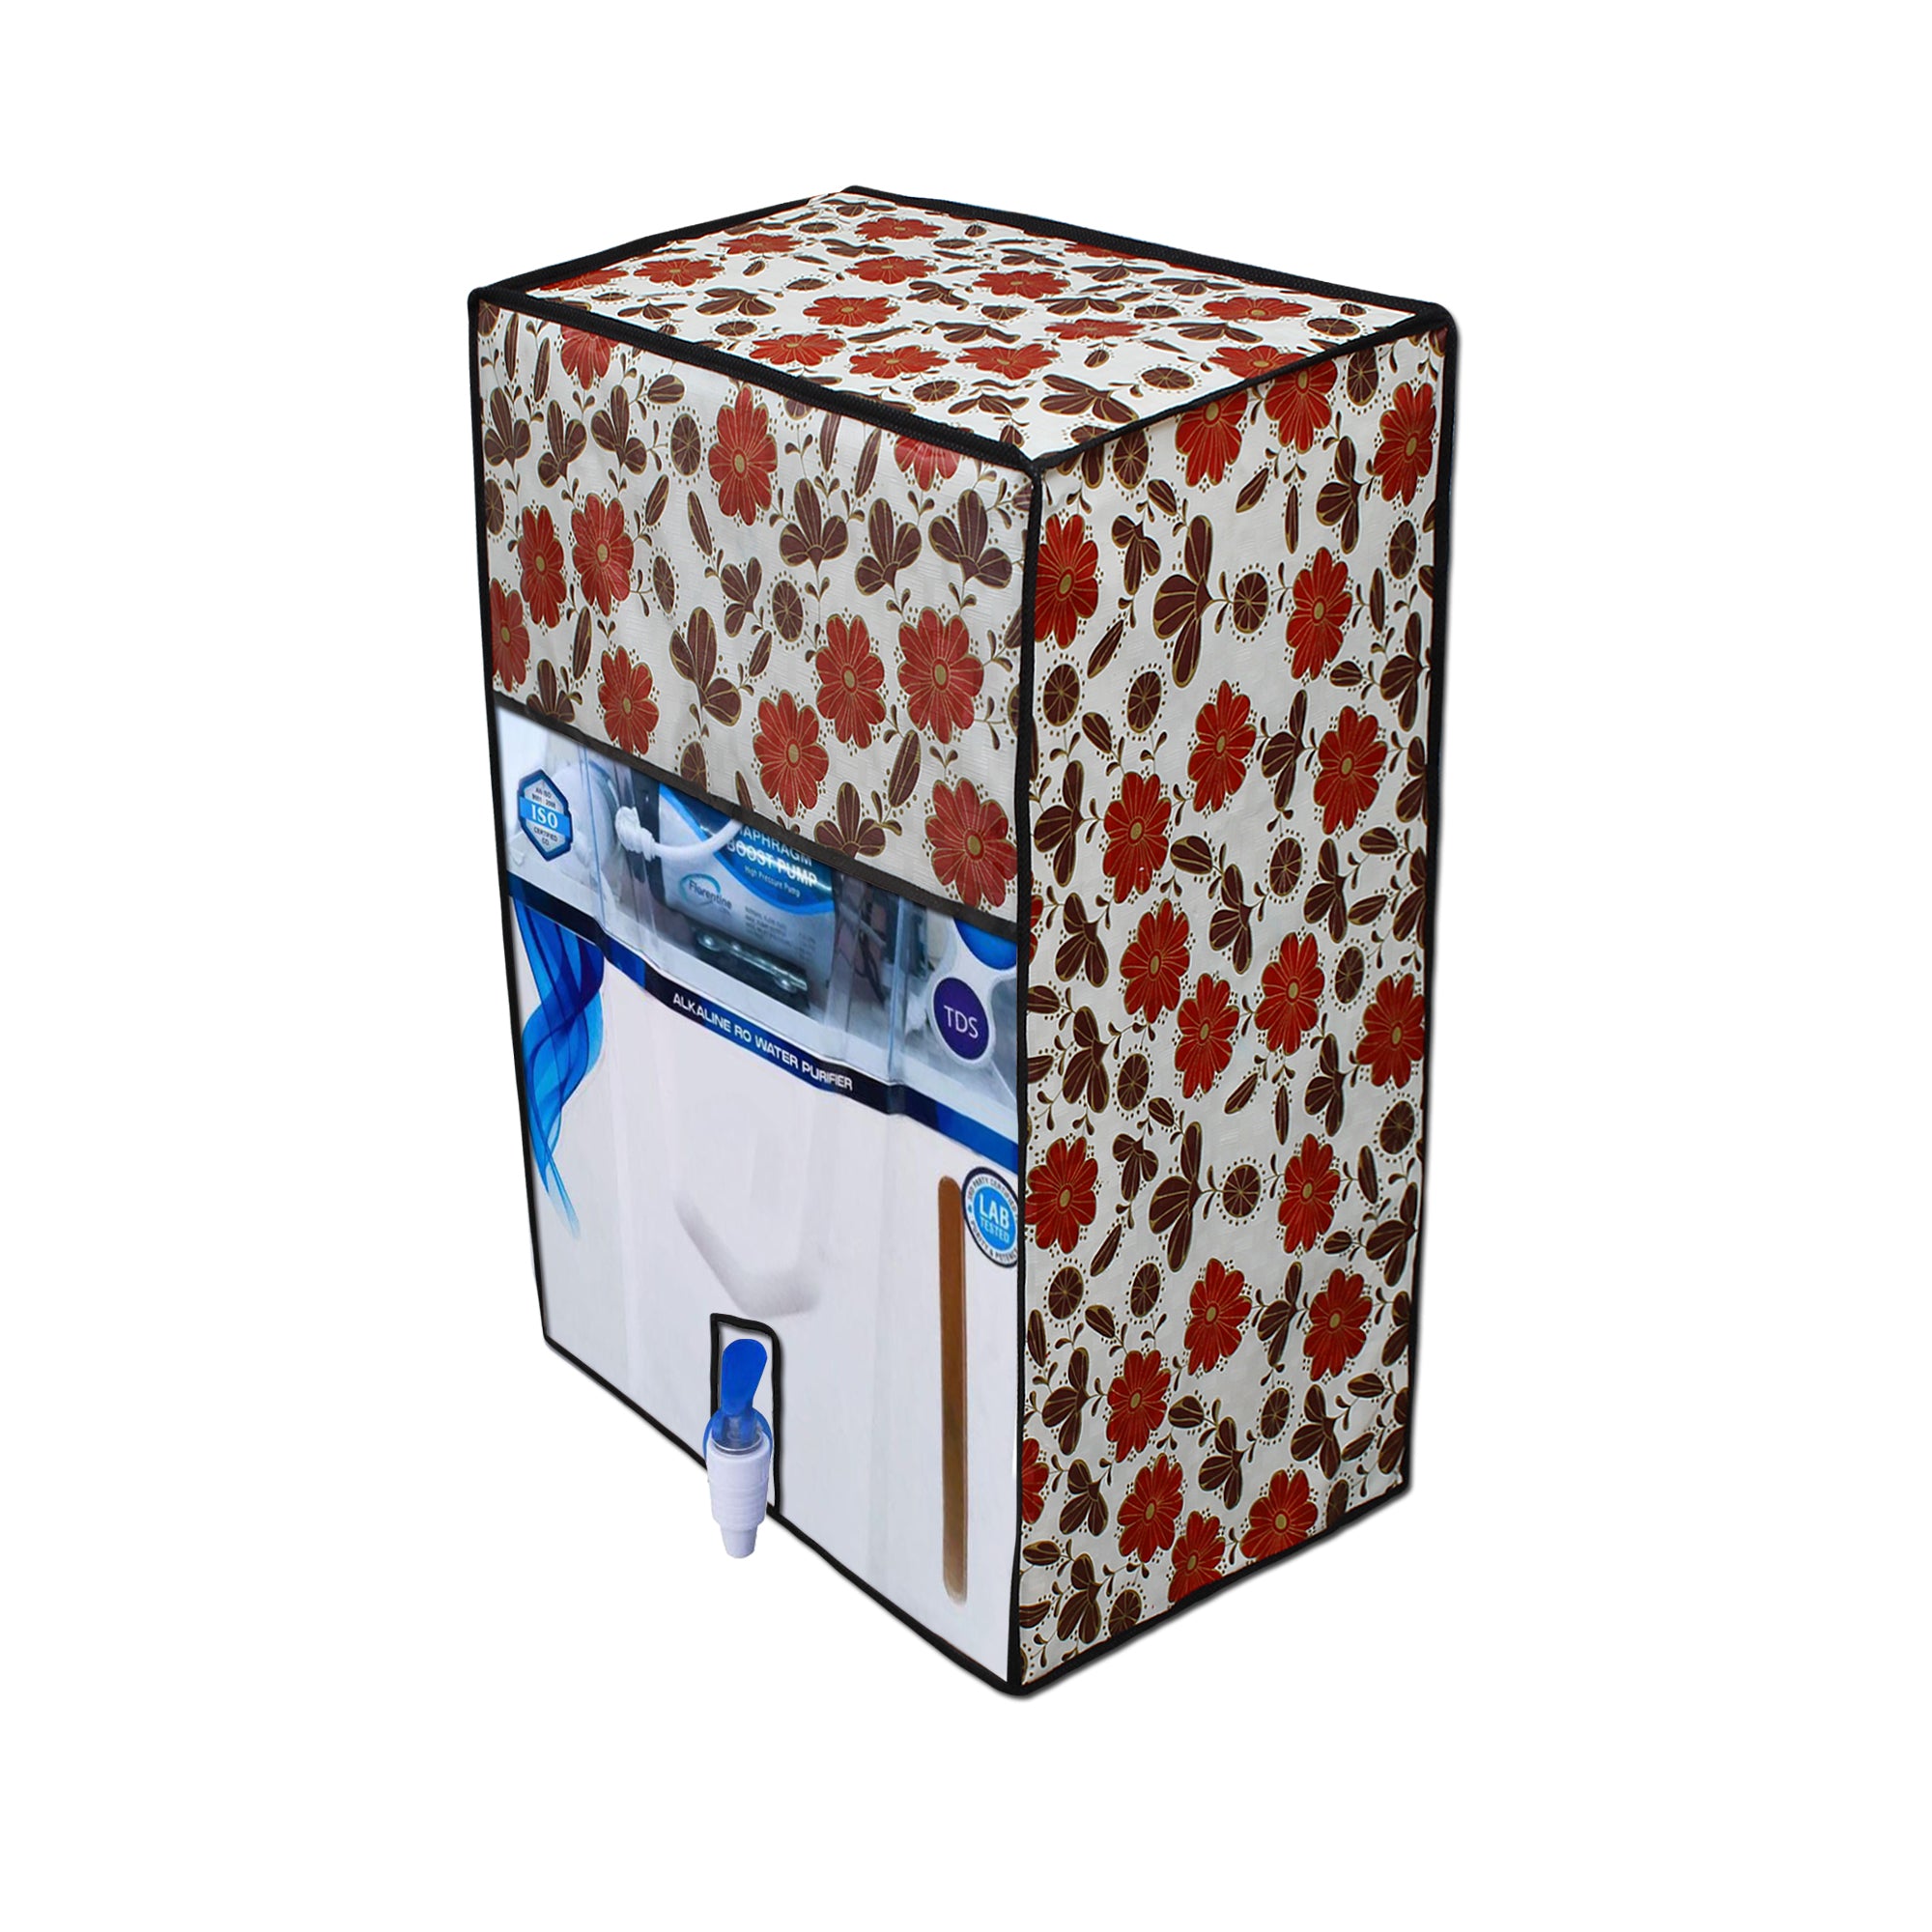 Waterproof & Dustproof Water Purifier RO Cover, SA20 - Dream Care Furnishings Private Limited